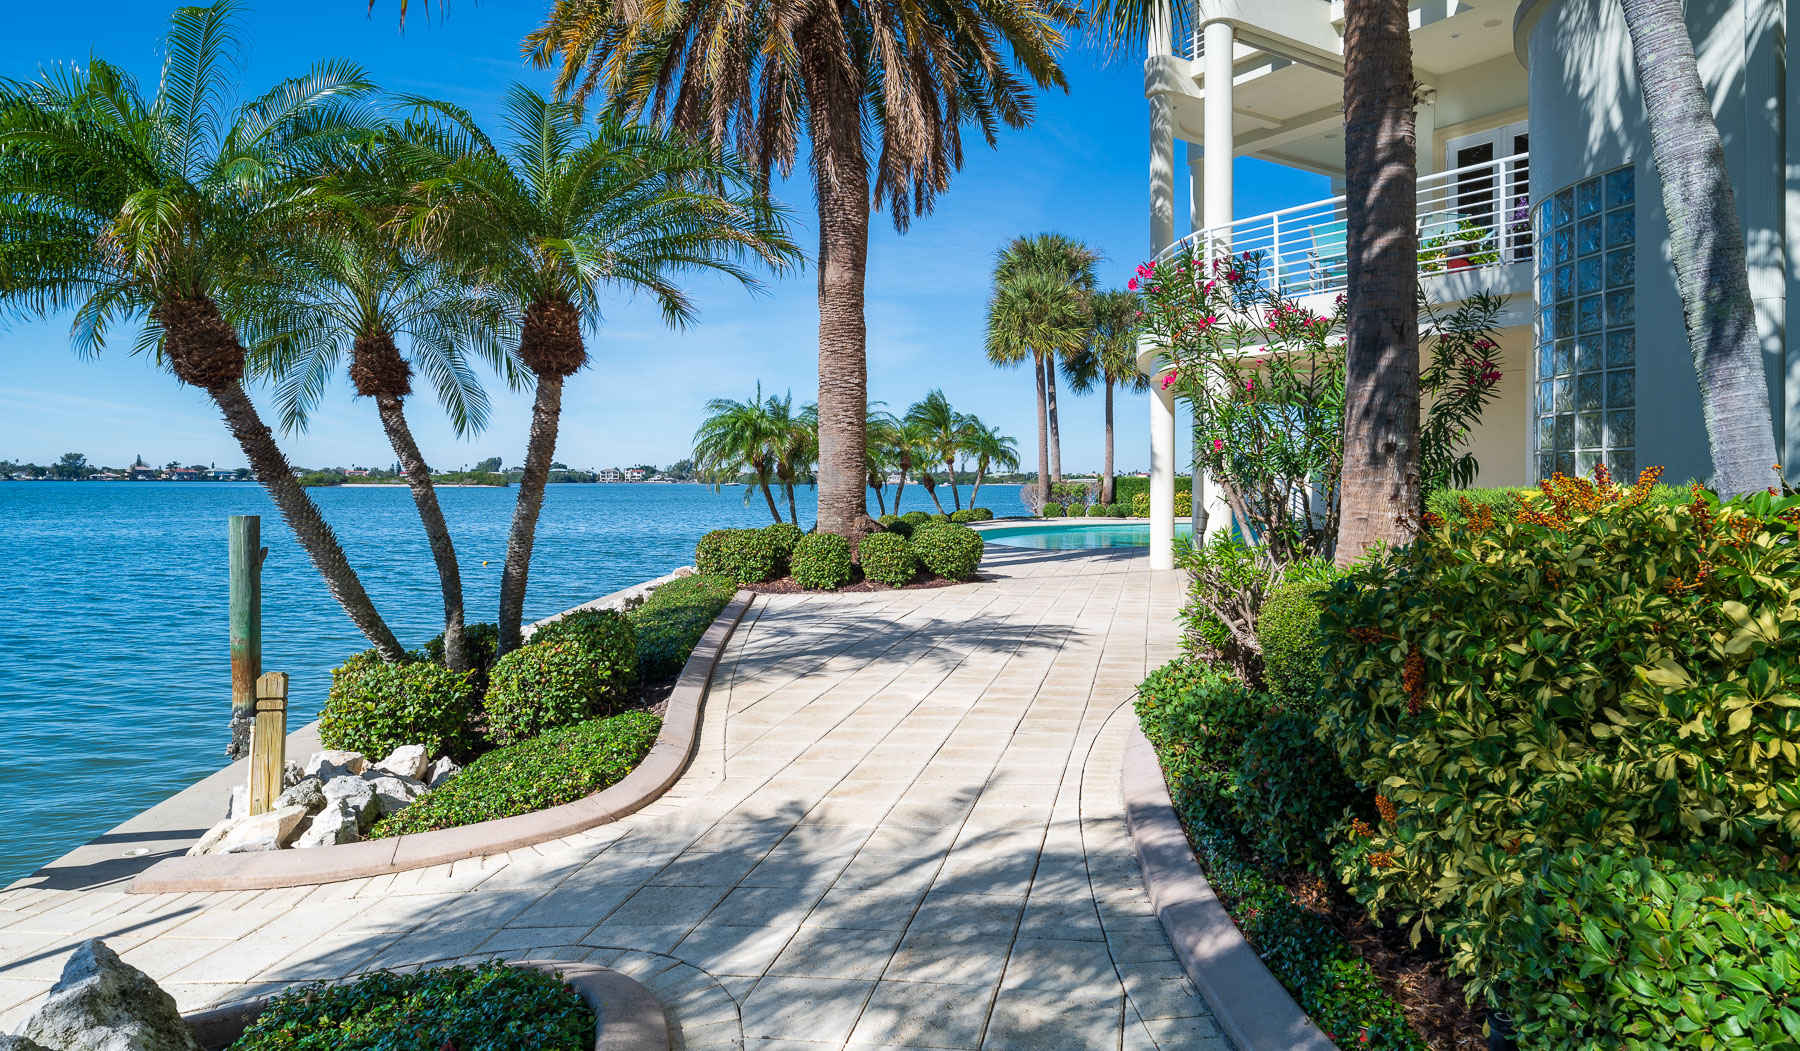 landscaping around walkway with palm trees